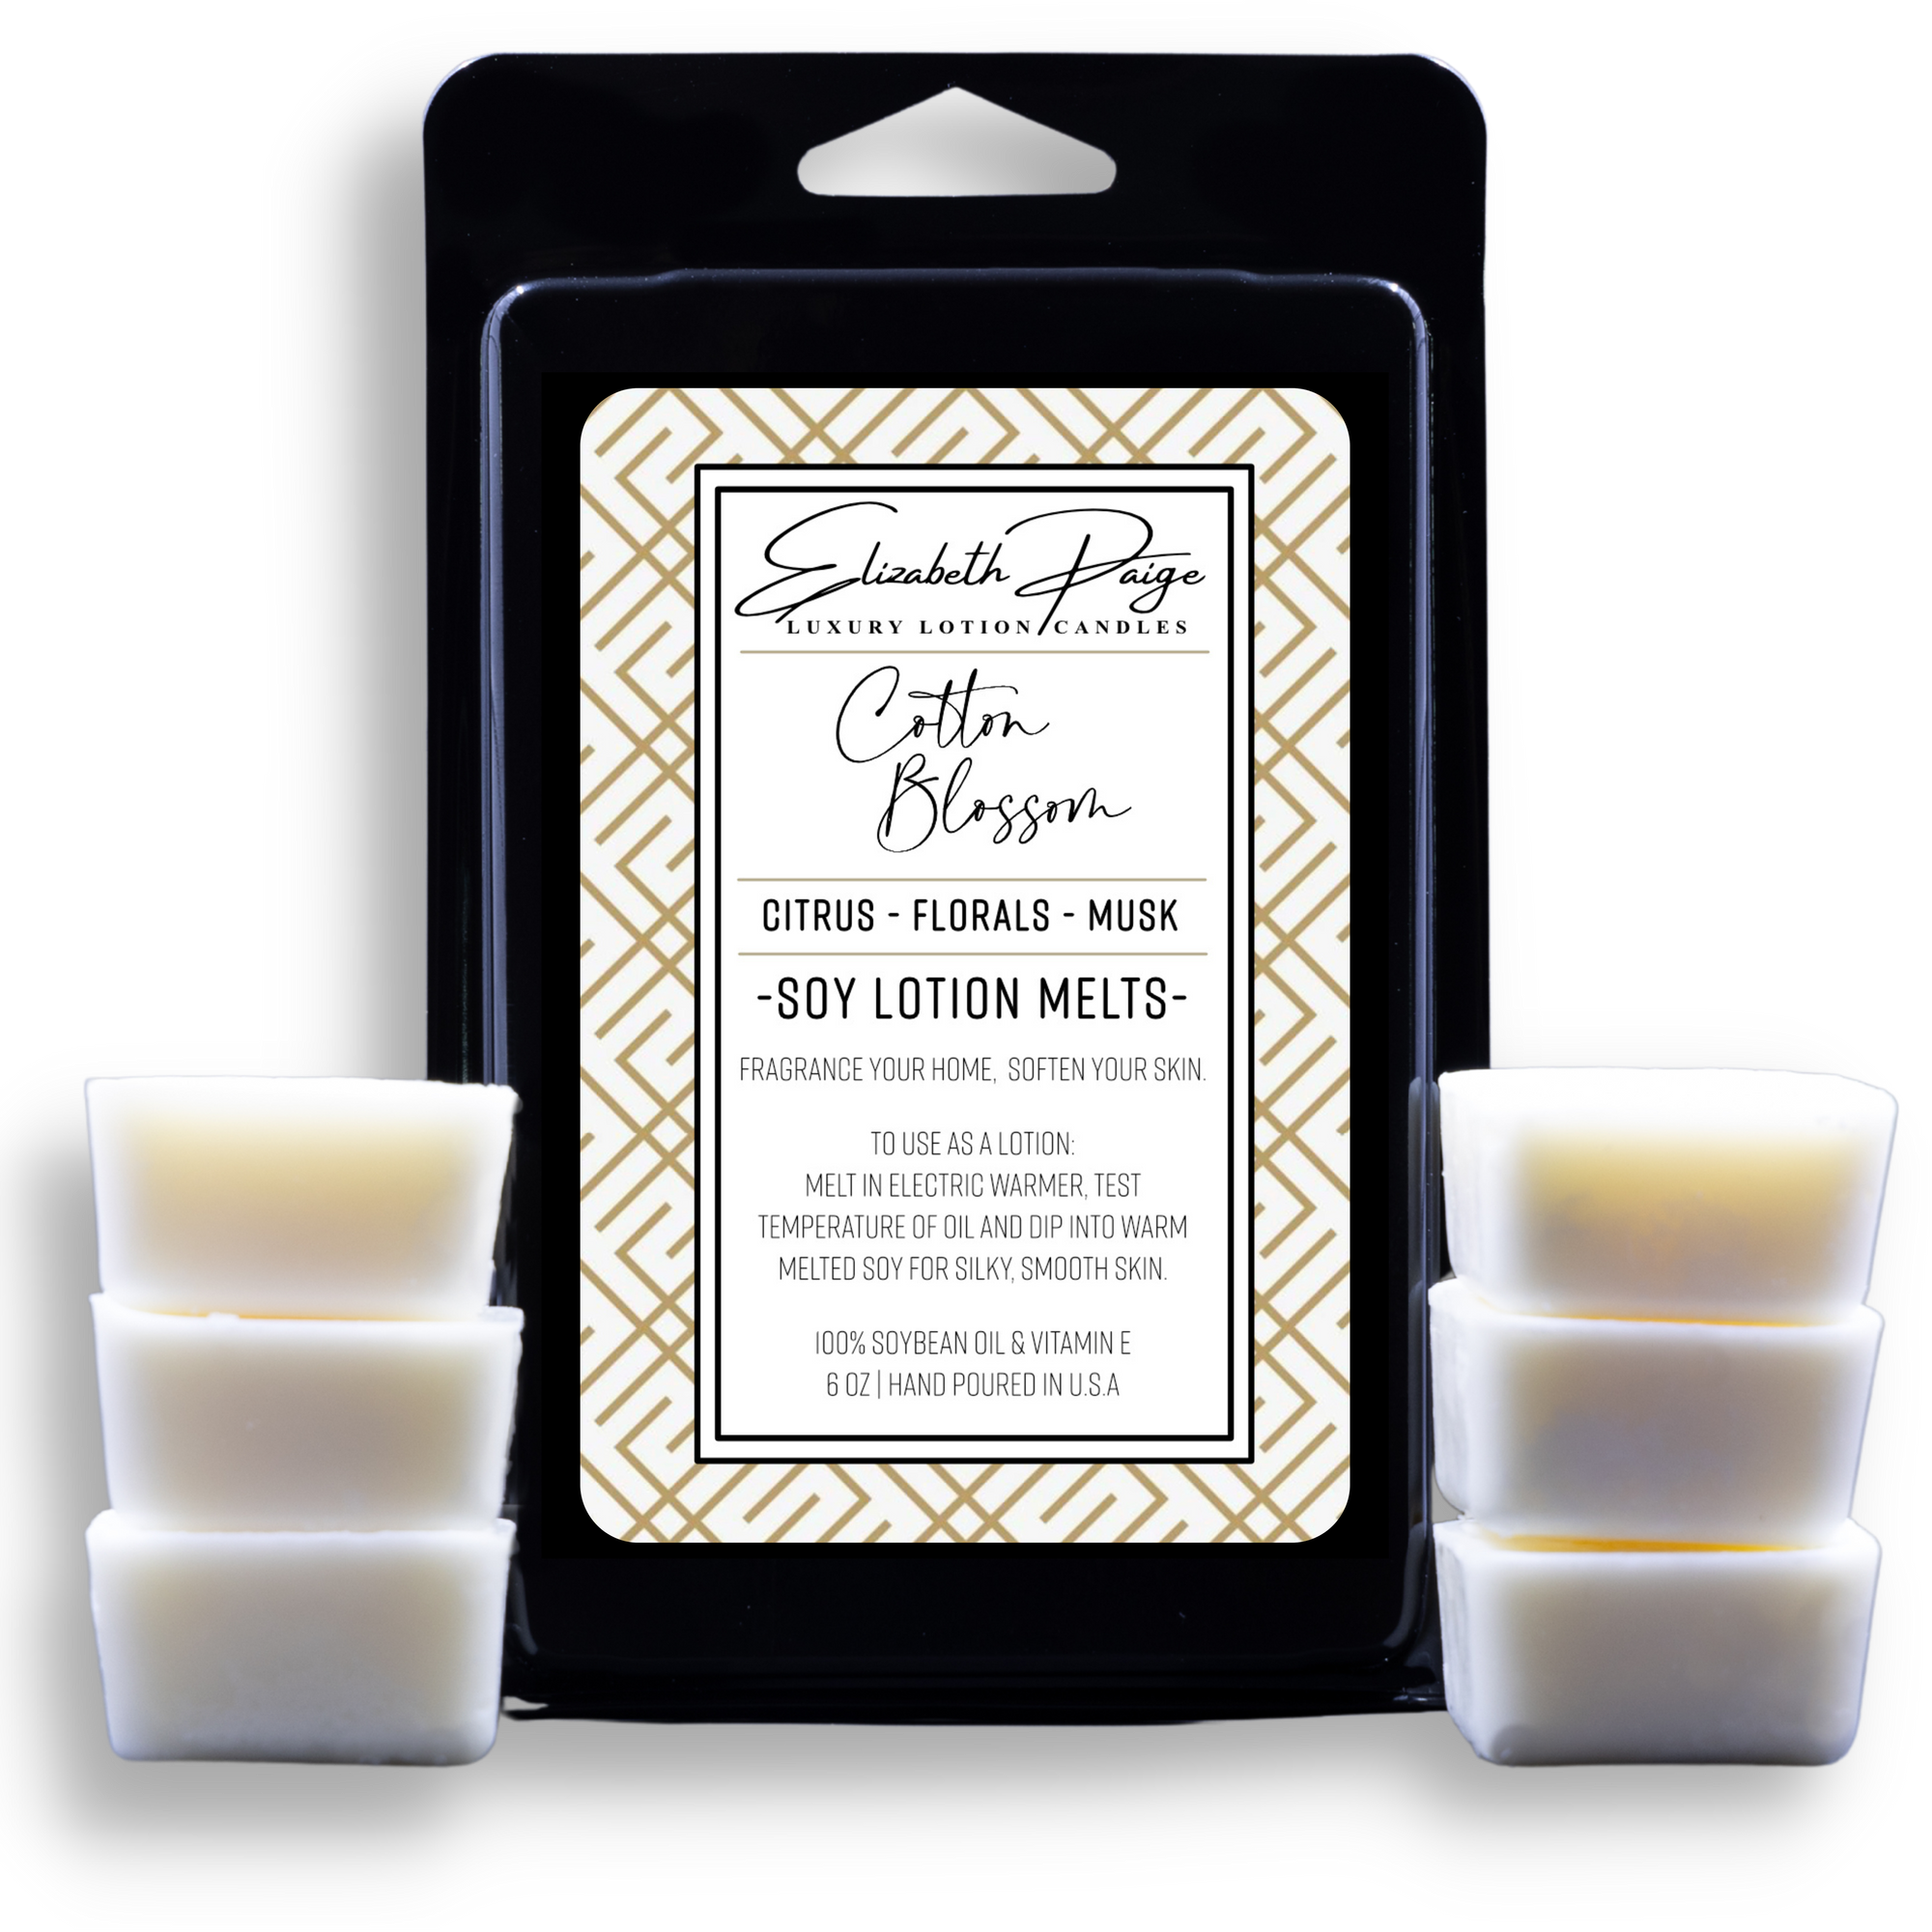 Cotton Blossom Soy Lotion Melts